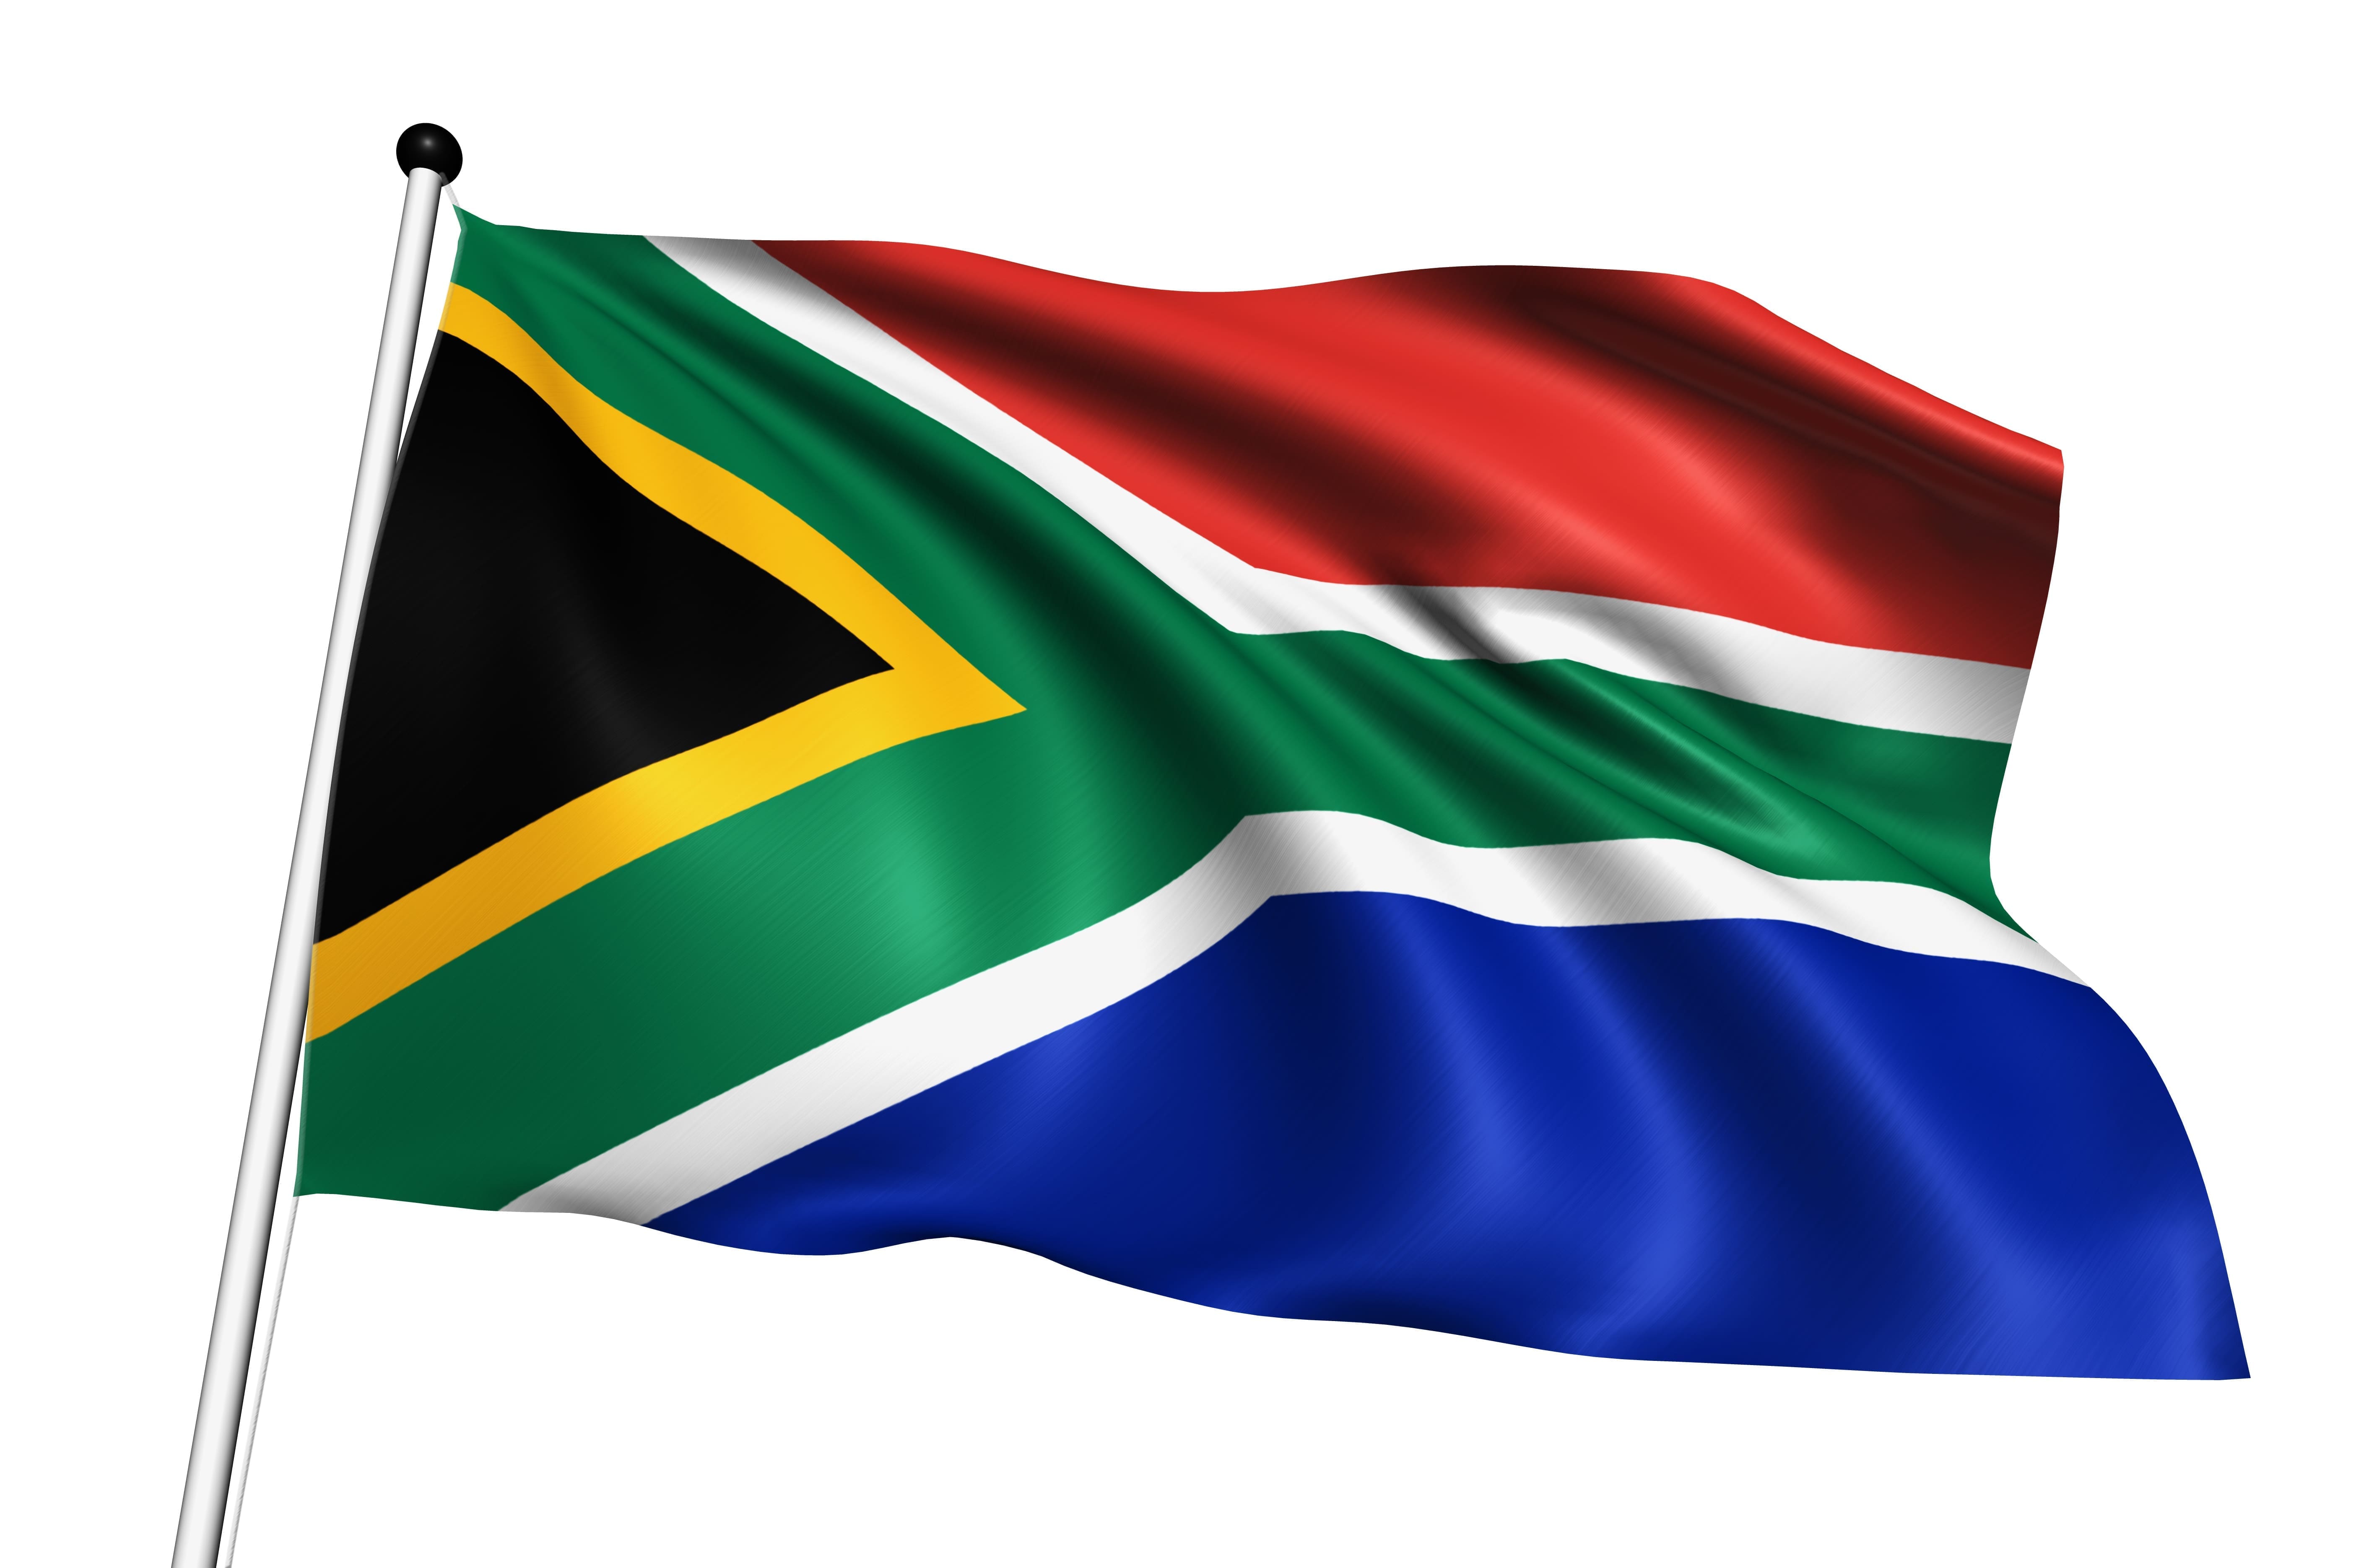 SALC in the news: South Africa ruling opens way for apartheid-era prosecutions